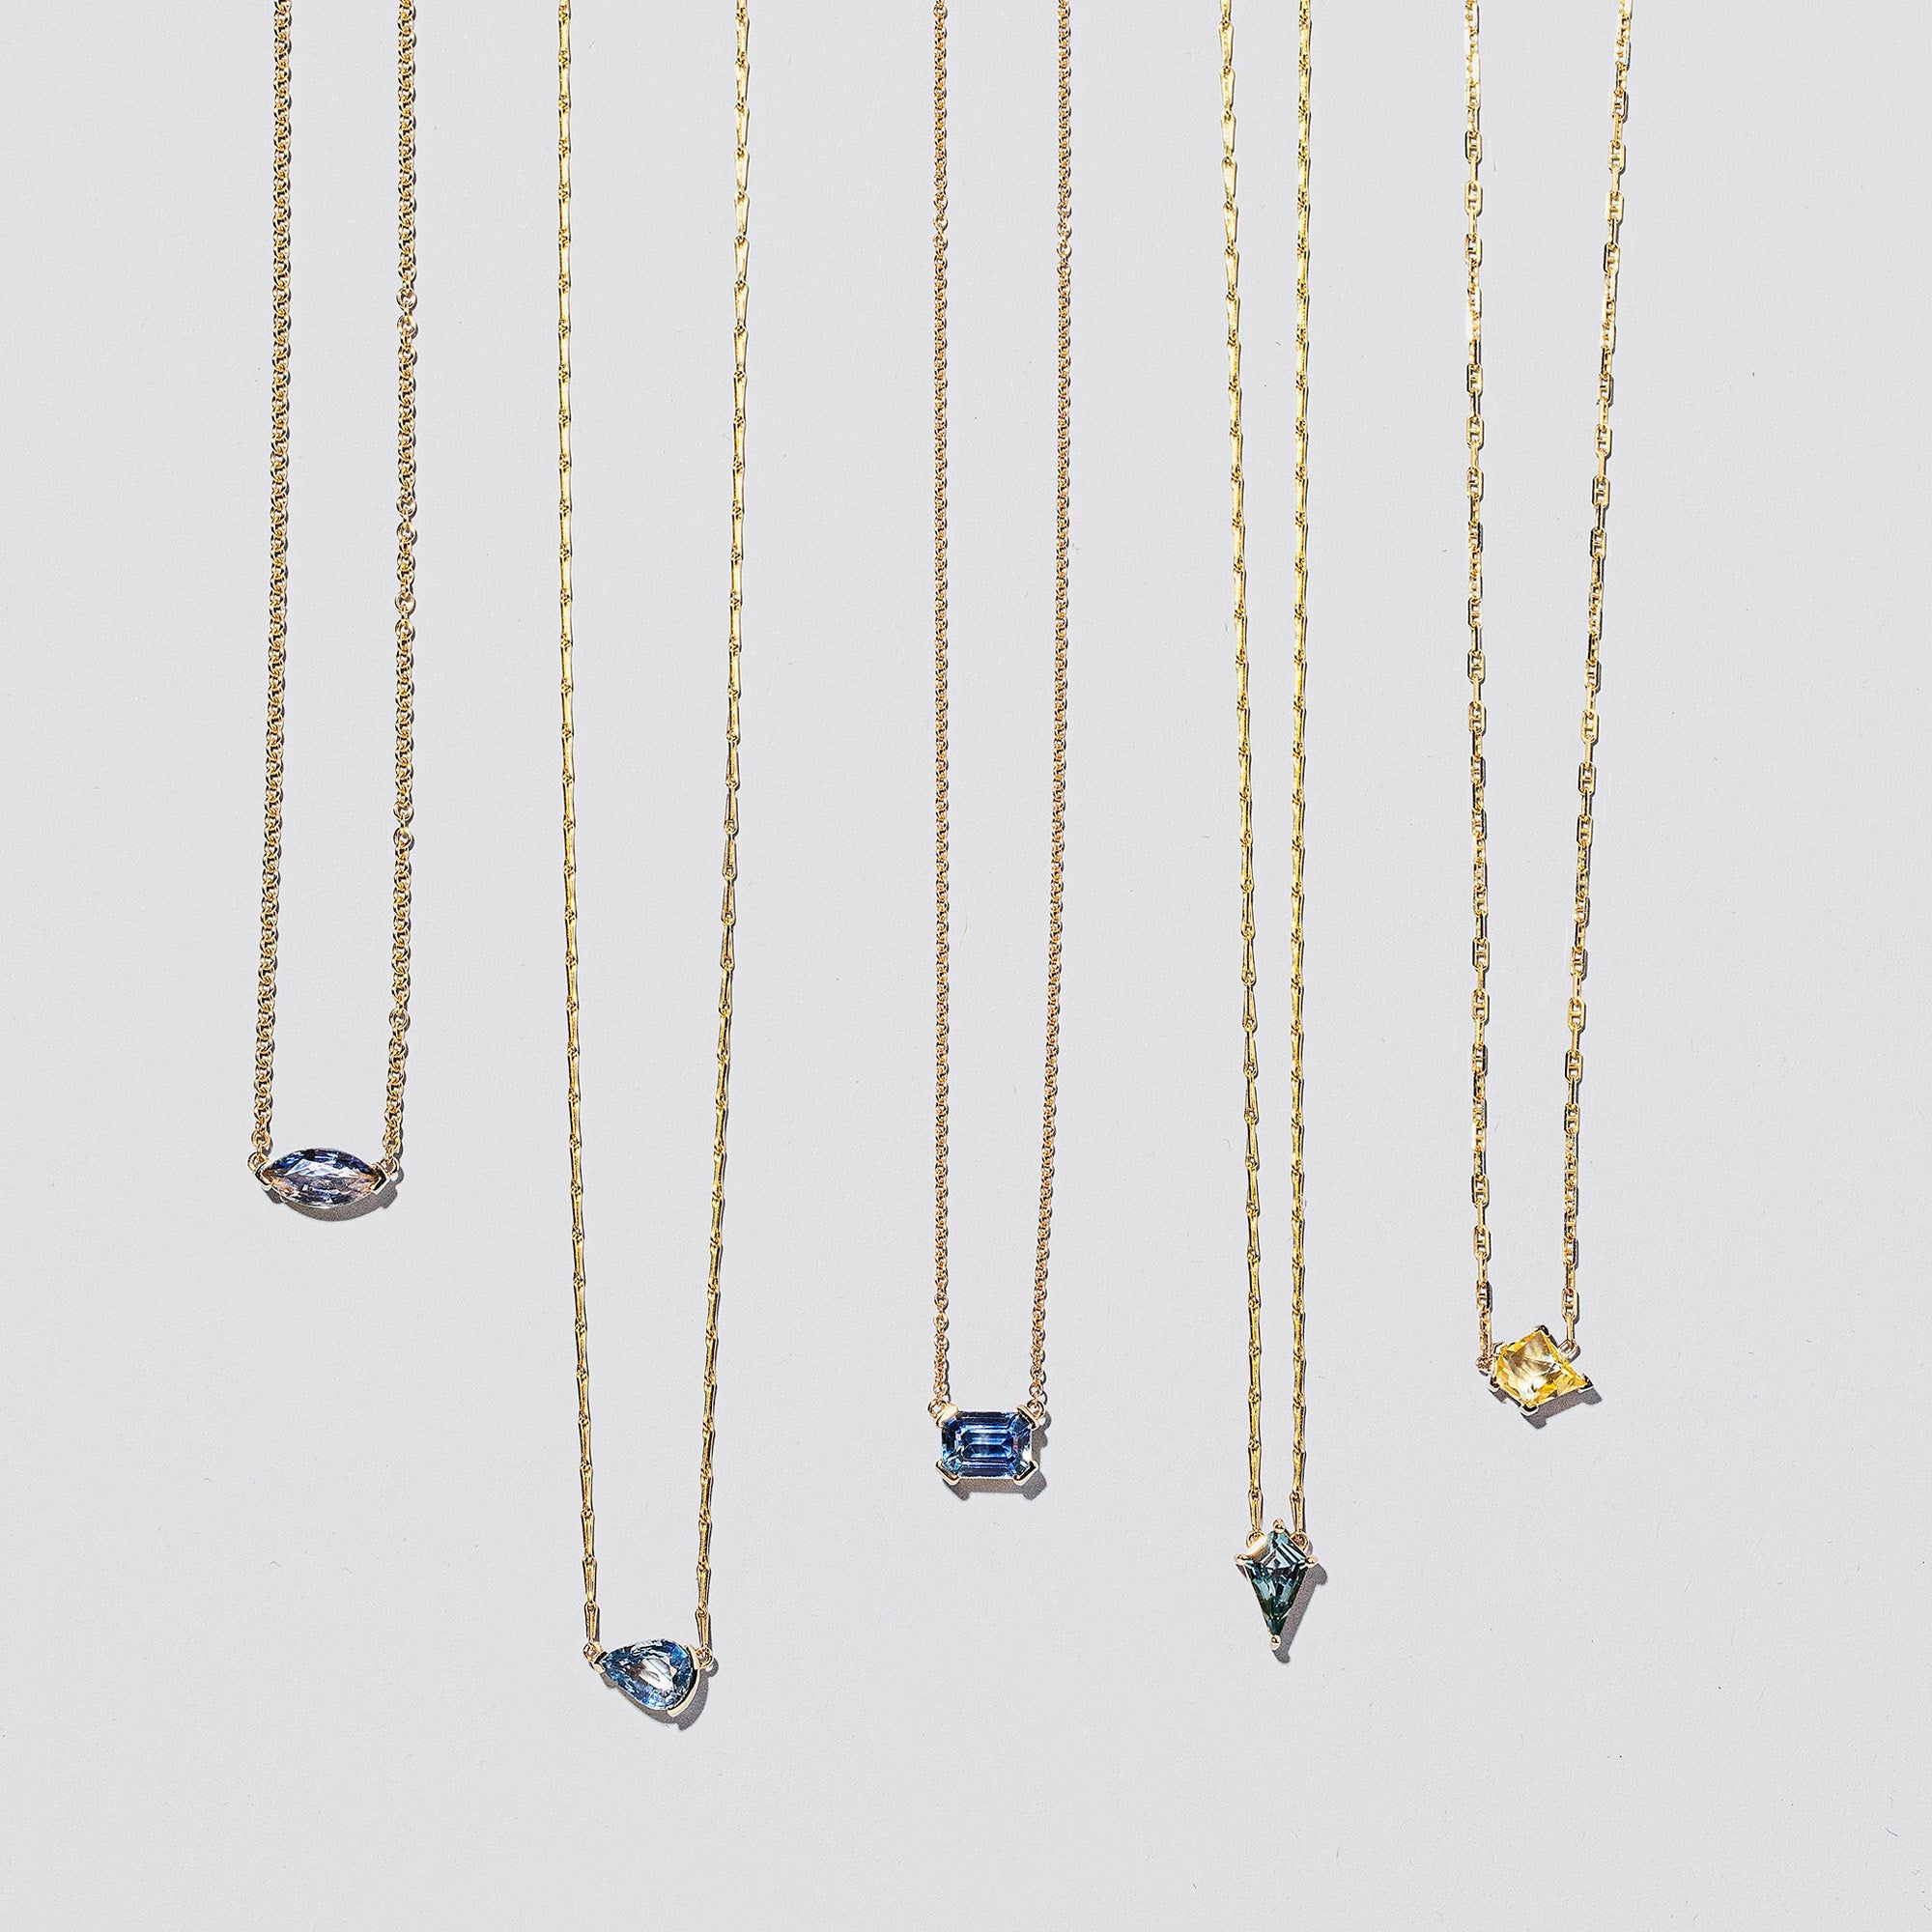 product_details::Group of Gemstone Necklaces on light colored background.